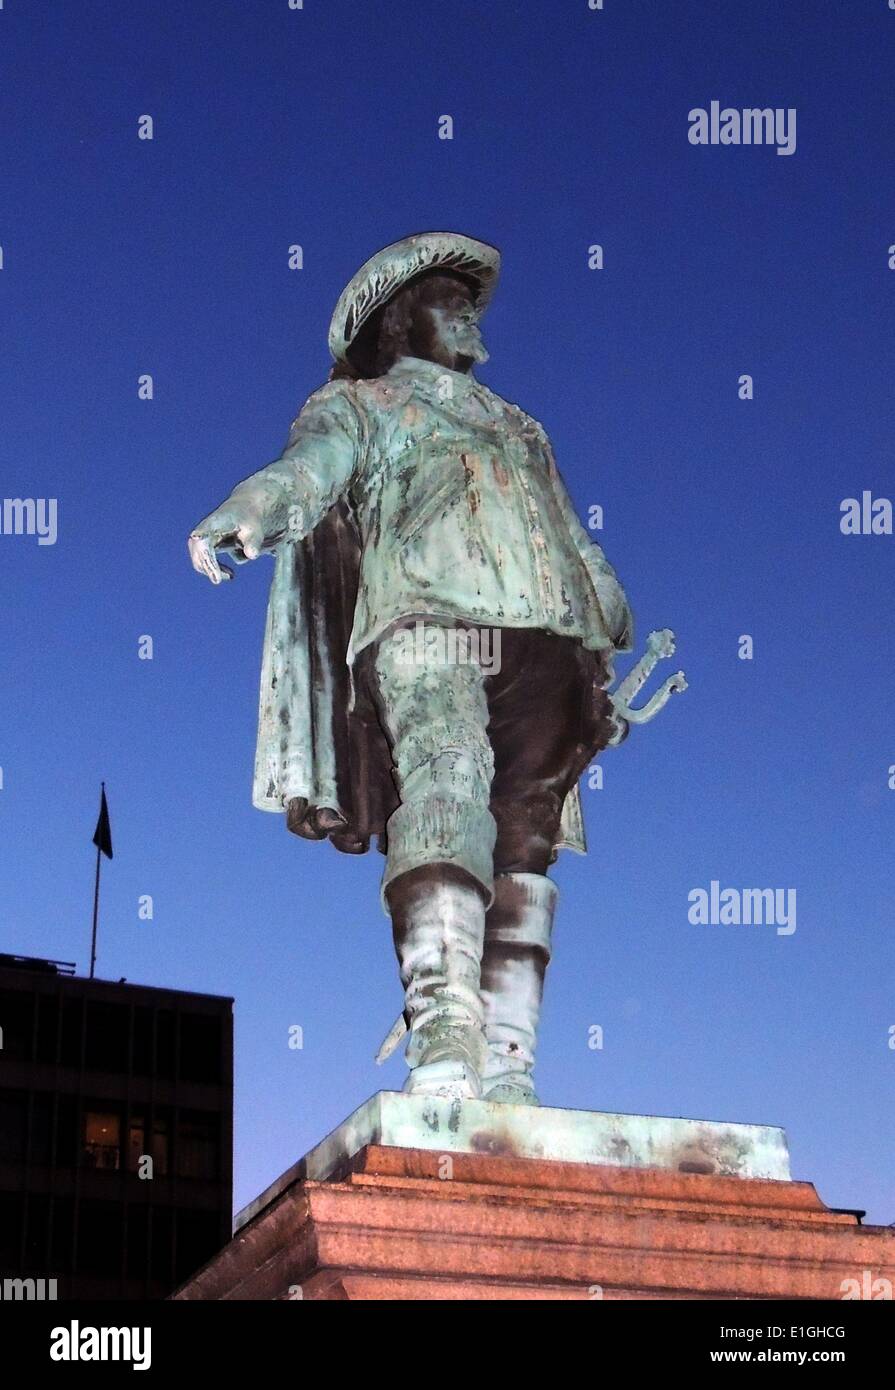 Christian IV (Danish: Christian den Fjerde; 12 April 1577 – 28 February 1648) was King of Denmark-Norway from 1588 until his death. He is the longest-reigning monarch of Denmark with a reign of more than 59 years. Statue in Oslo, Norway Stock Photo